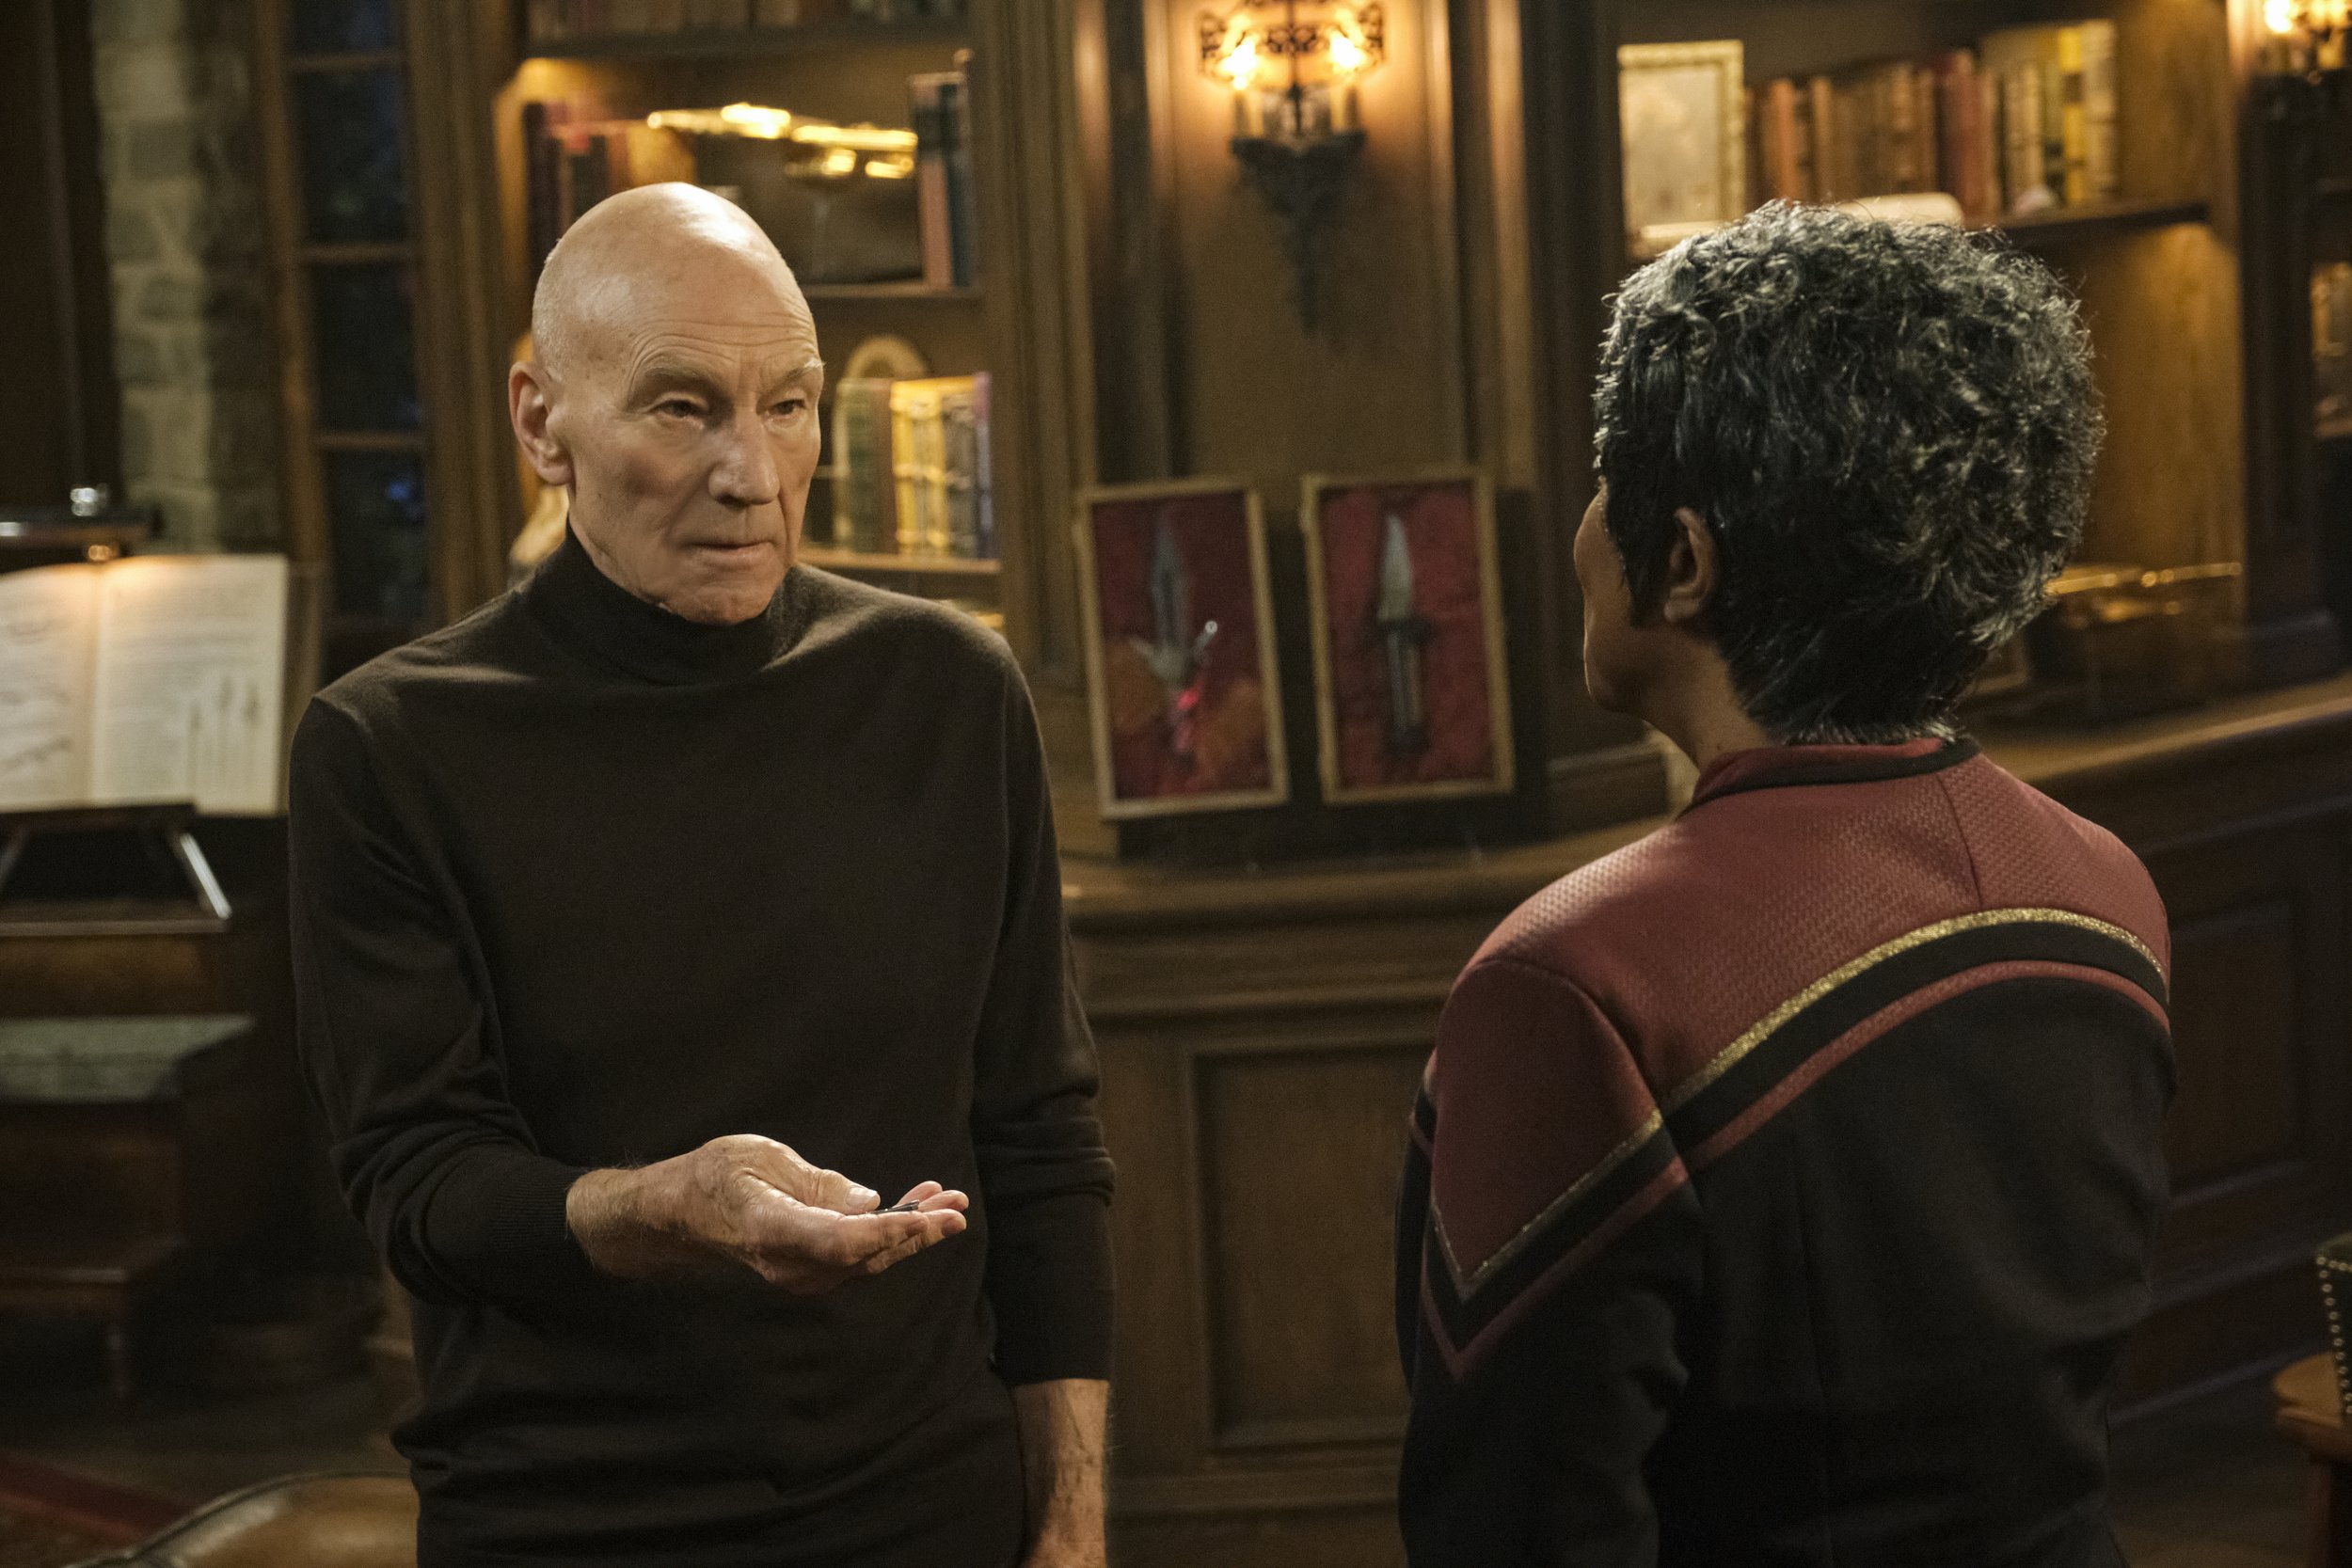   Pictured: Sir Patrick Stewart as Jean-Luc Picard and April Grace as Admiral Whitley of the Paramount+ original series STAR TREK: PICARD. Photo Cr: Trae Patton/Paramount+ (C)2022 ViacomCBS. All Rights Reserved.  